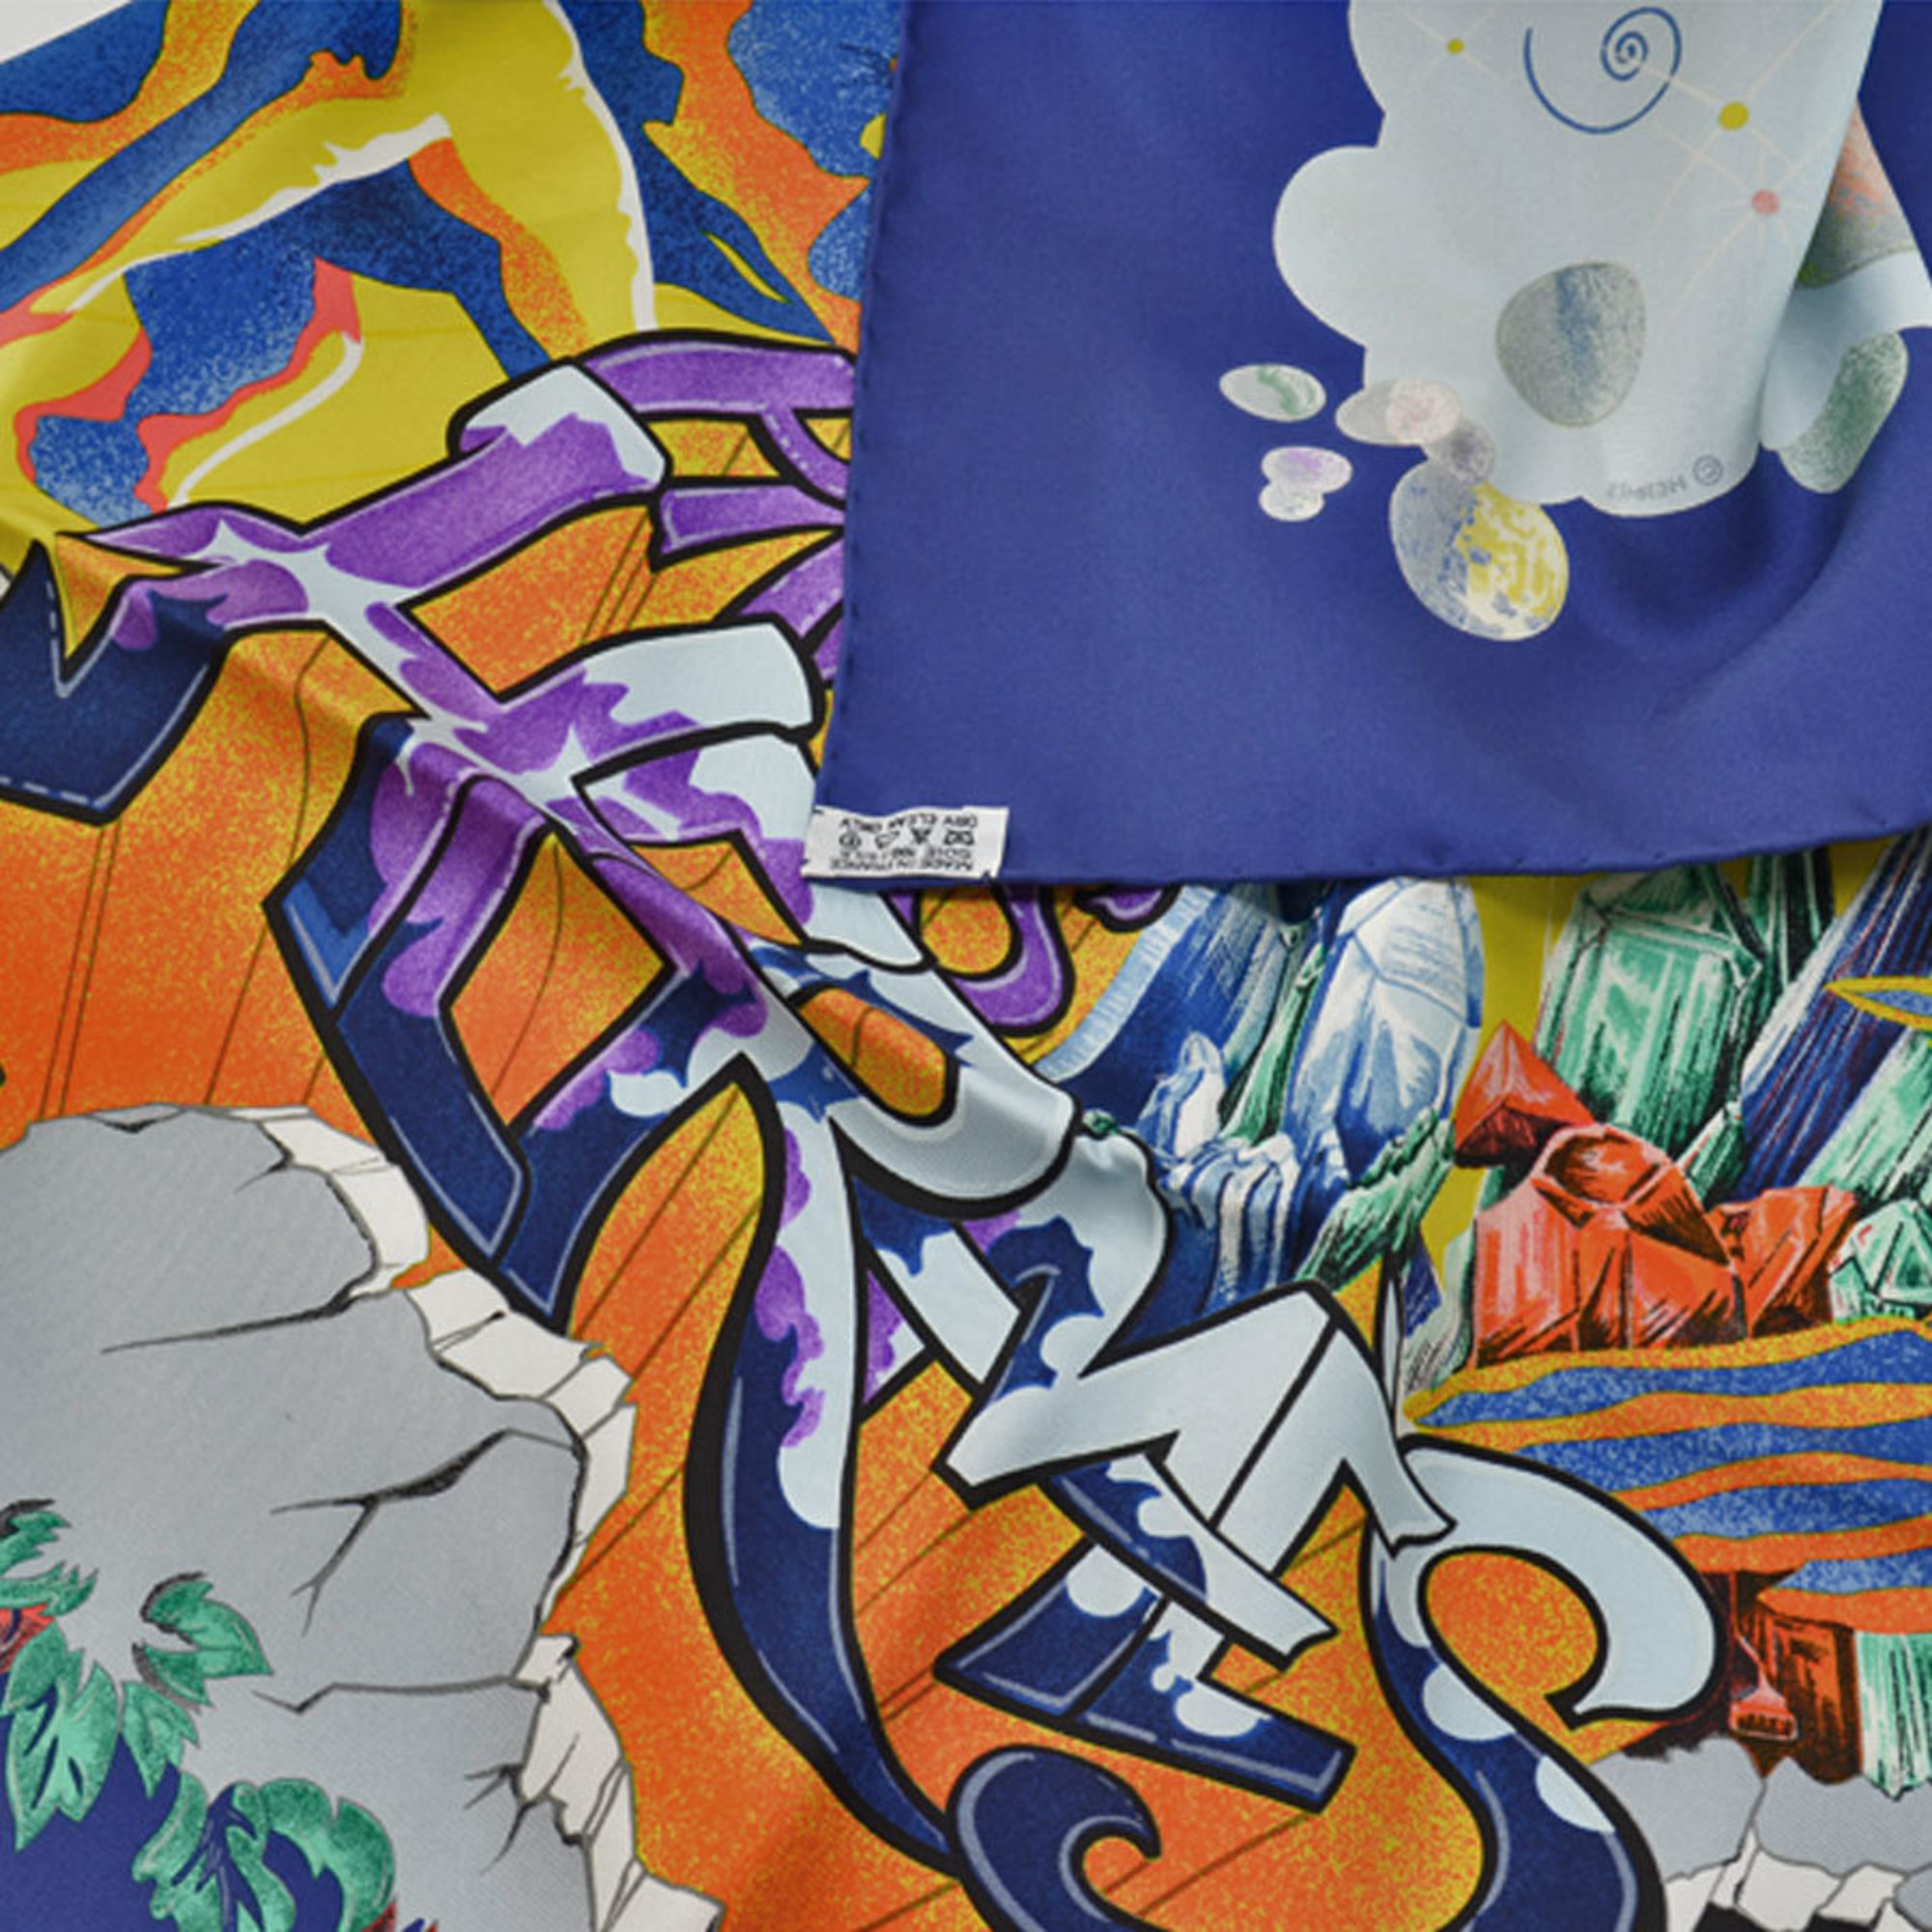 Hermes HERMES Scarf Carre 90 THE ALFEE 25th Anniversary AUBE LIBRE COMME L'ANGE Dawn Navy Yellow Multi Silk Ladies